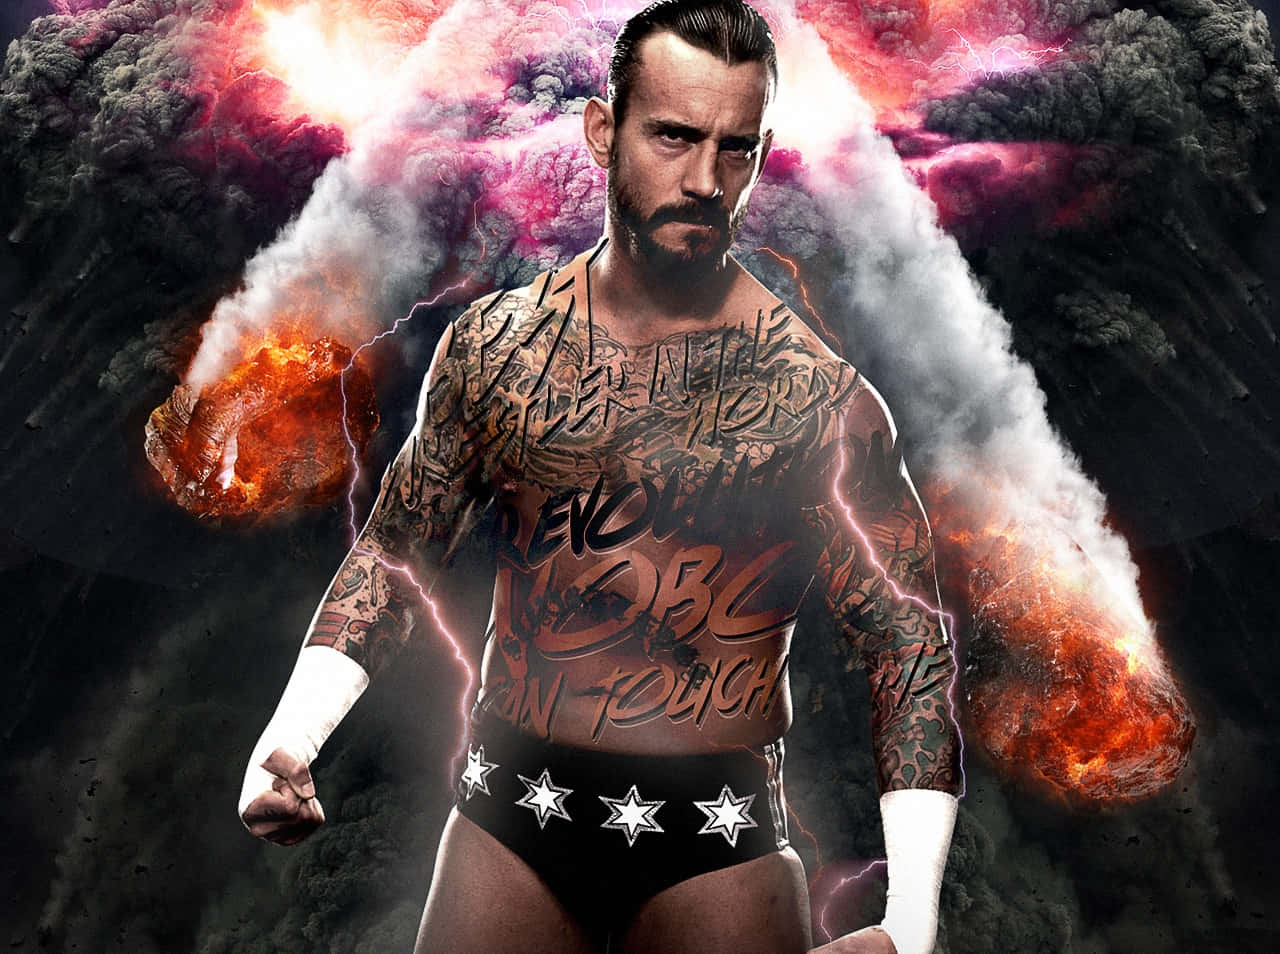 Wwe Wrestler With Tattoos In Front Of A Fireball